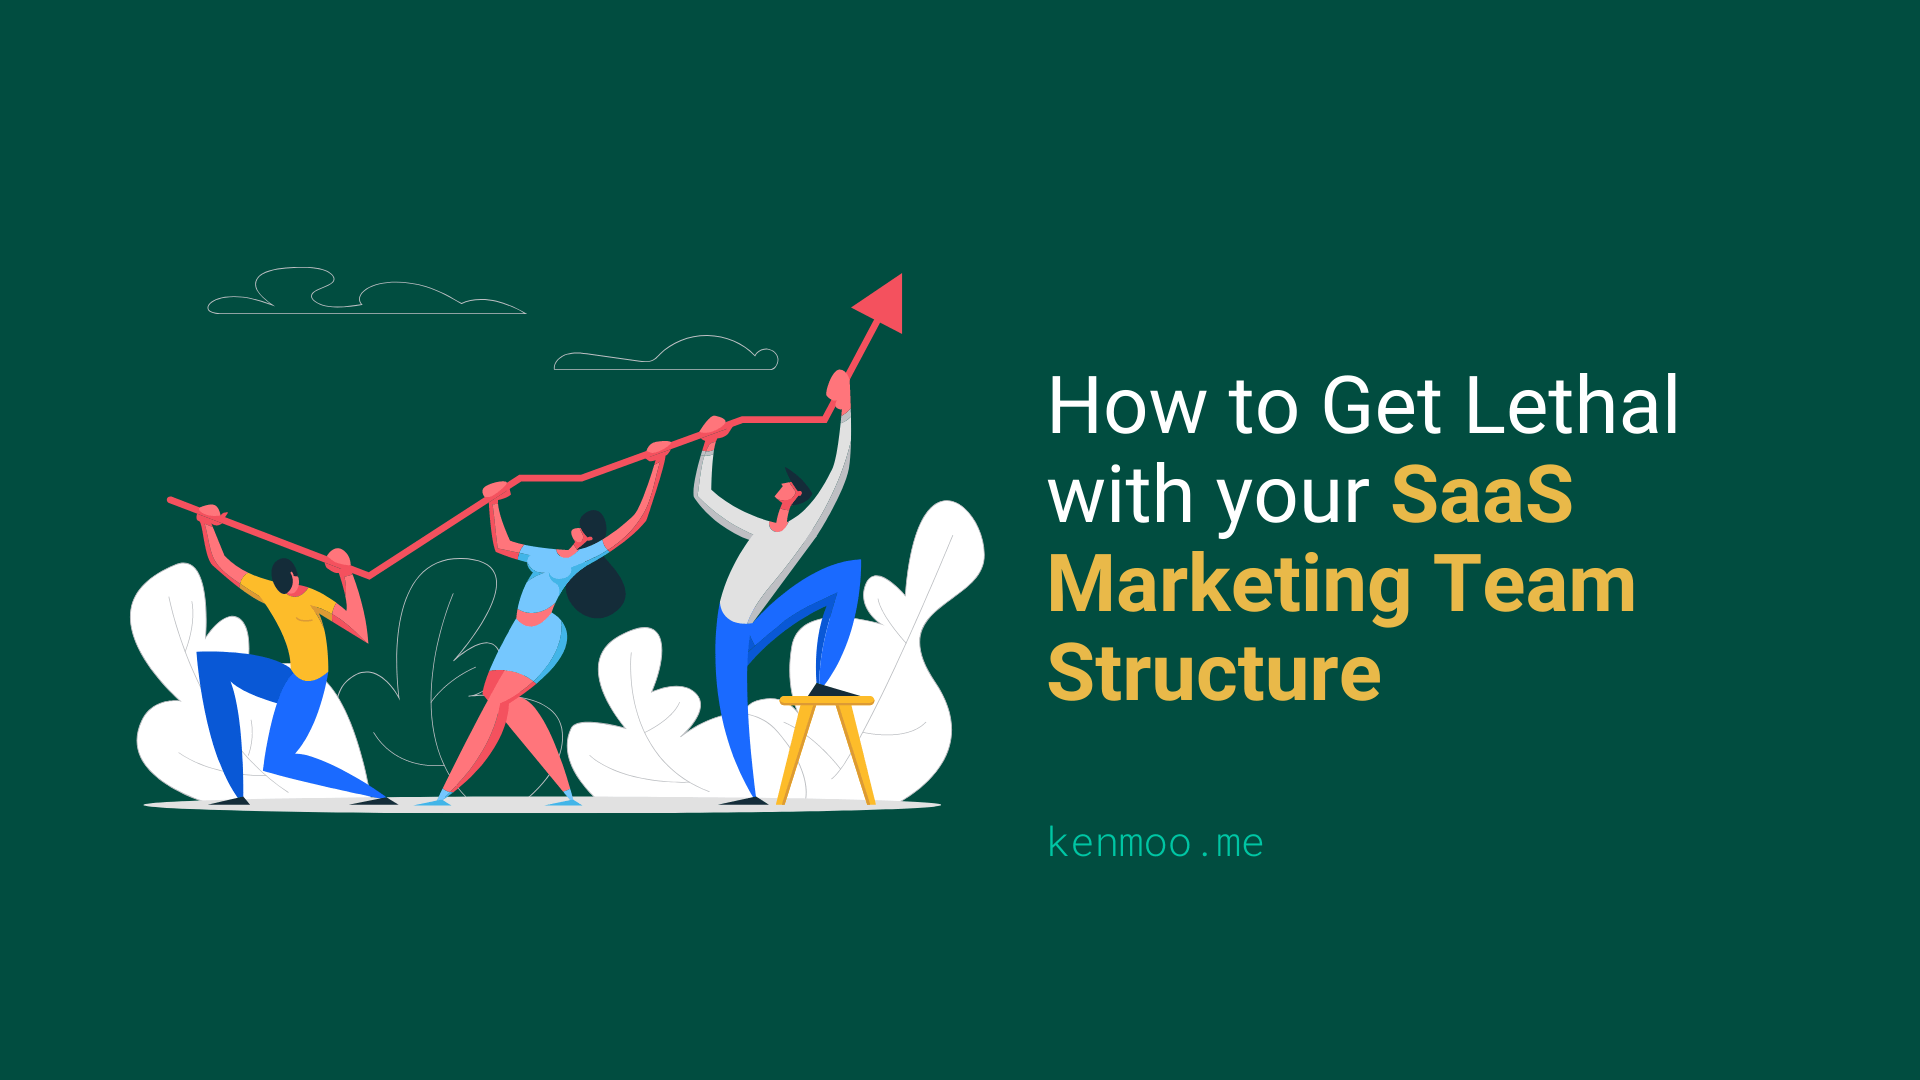 How To Get Lethal with Your SaaS Marketing Team Structure